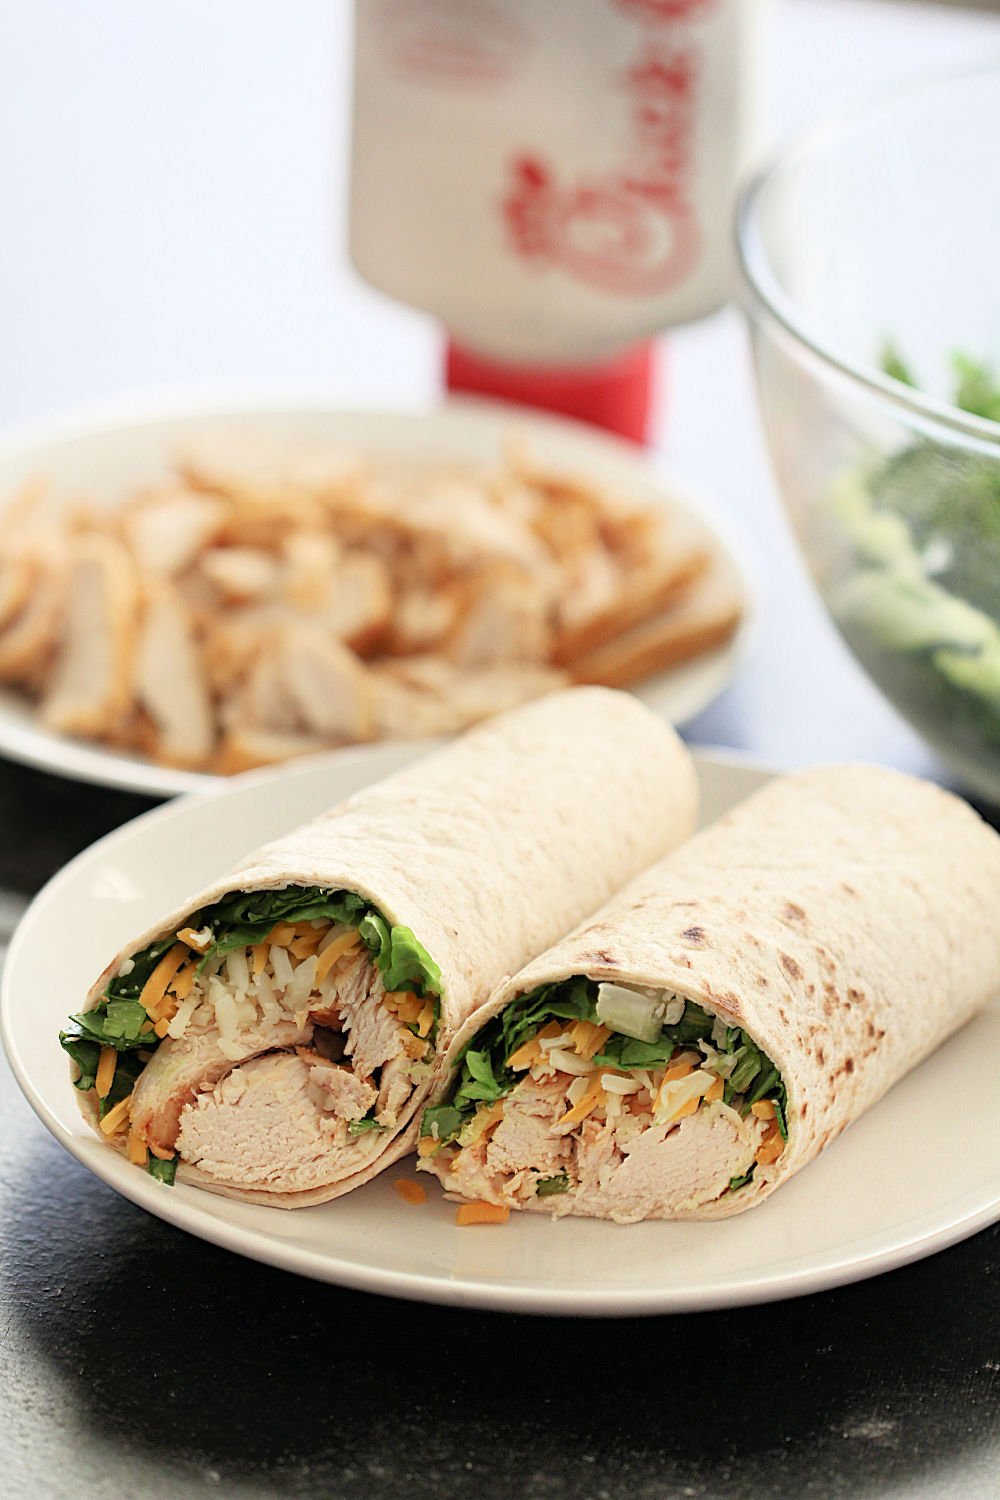 Copycat Chicke-Fil-A Grilled Chicken Cool Wraps